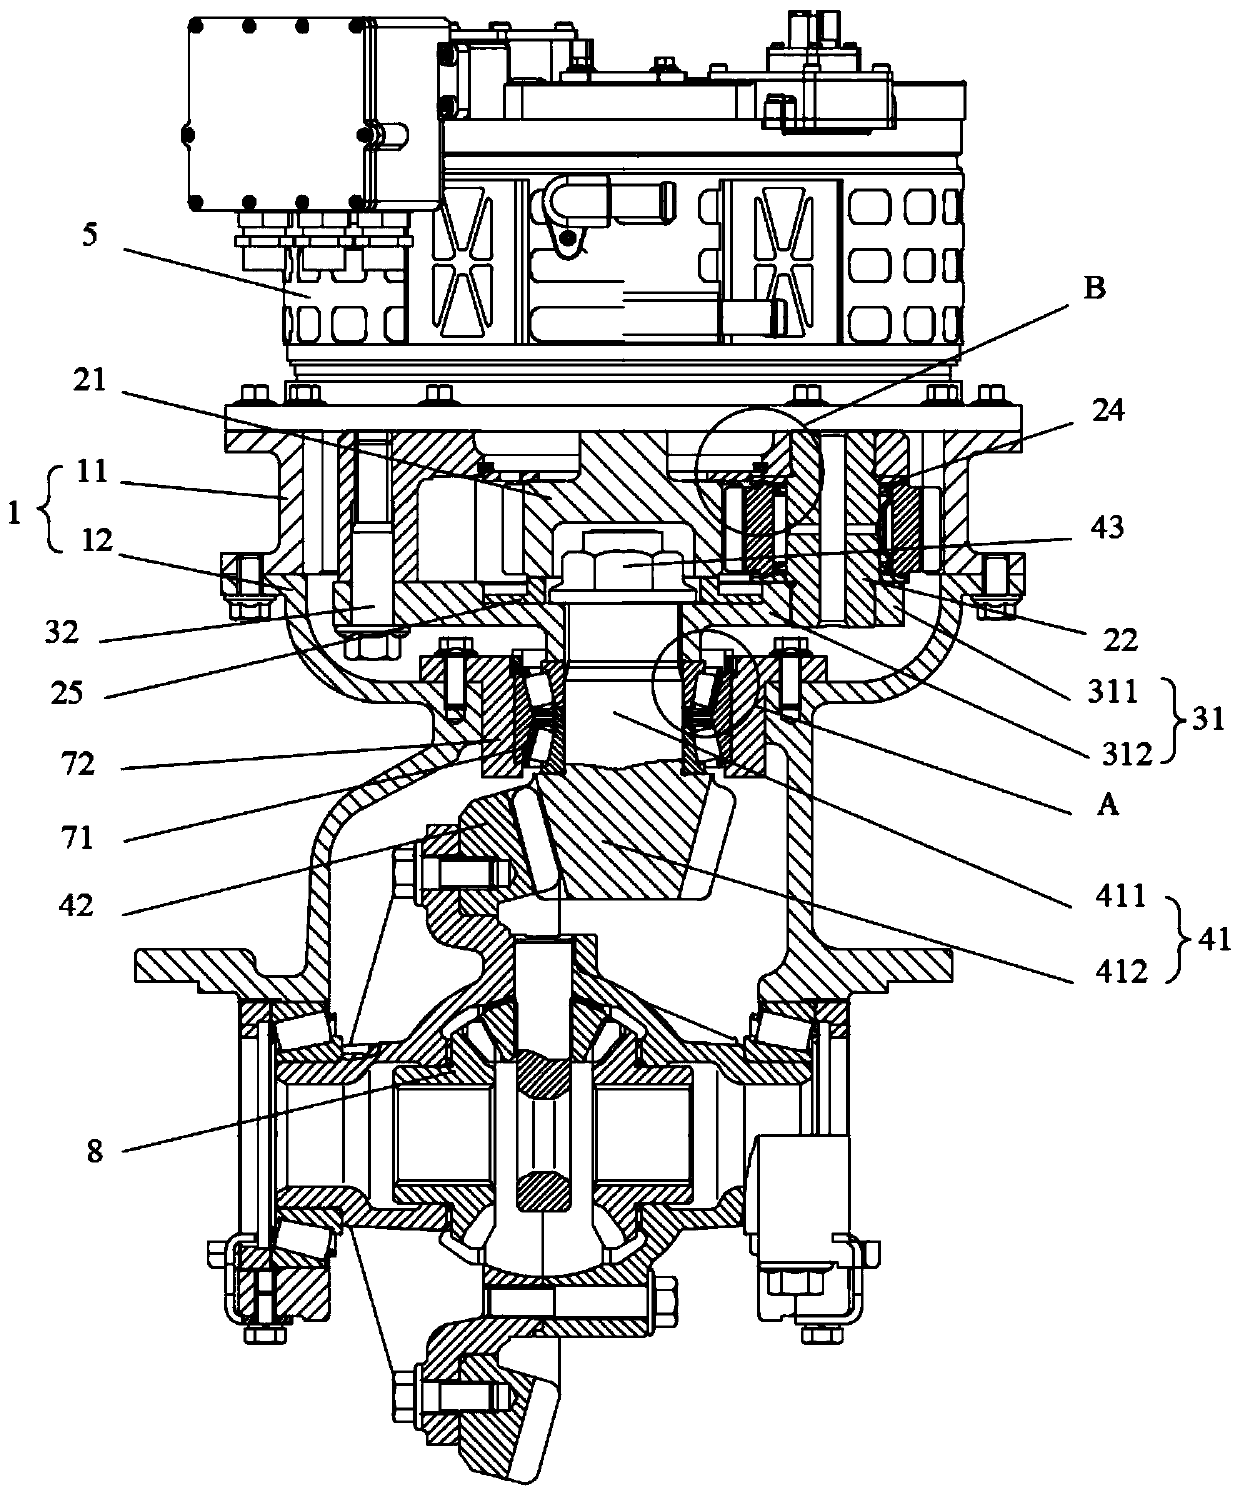 Drive axle reducer for an integrated motor